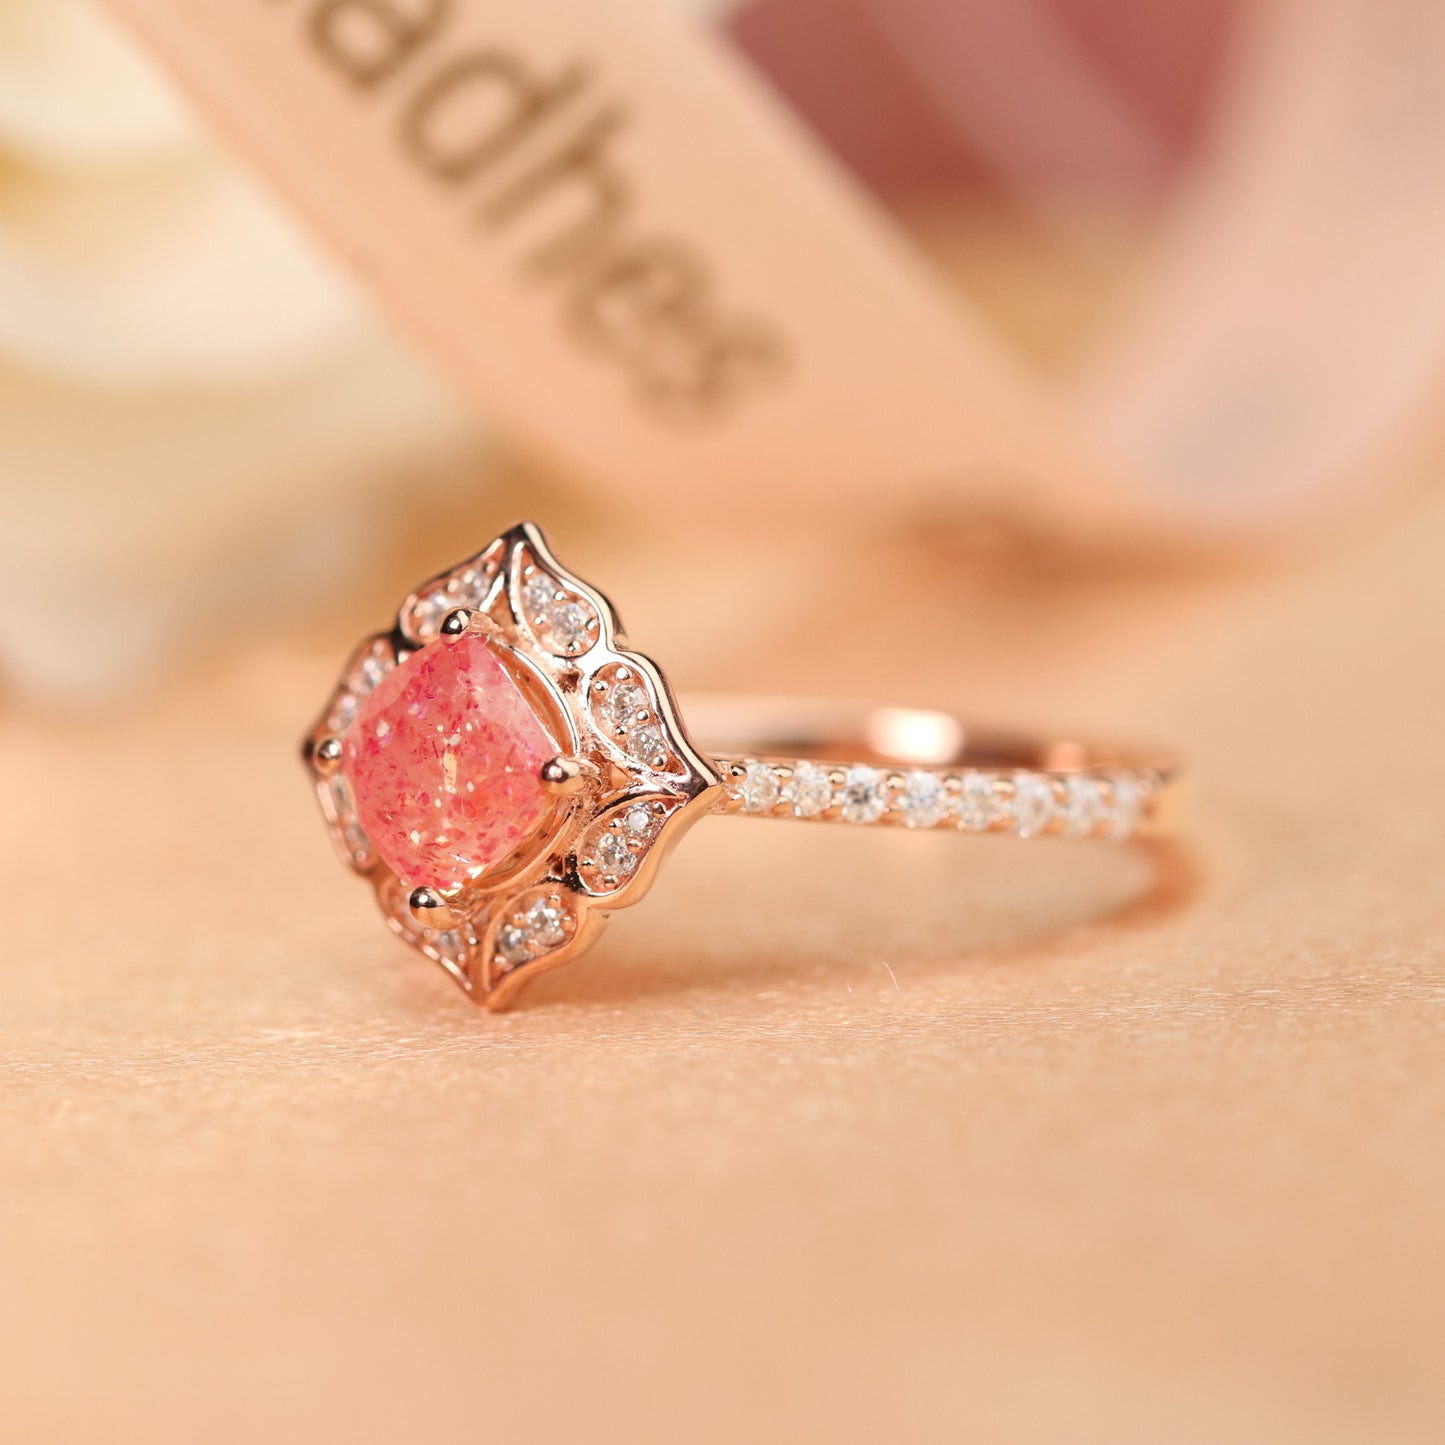 Vintage Flower 1.25 carat Round Cut Strawberry Quartz and Diamond Half-pave Halo Ring for Women in Rose Gold